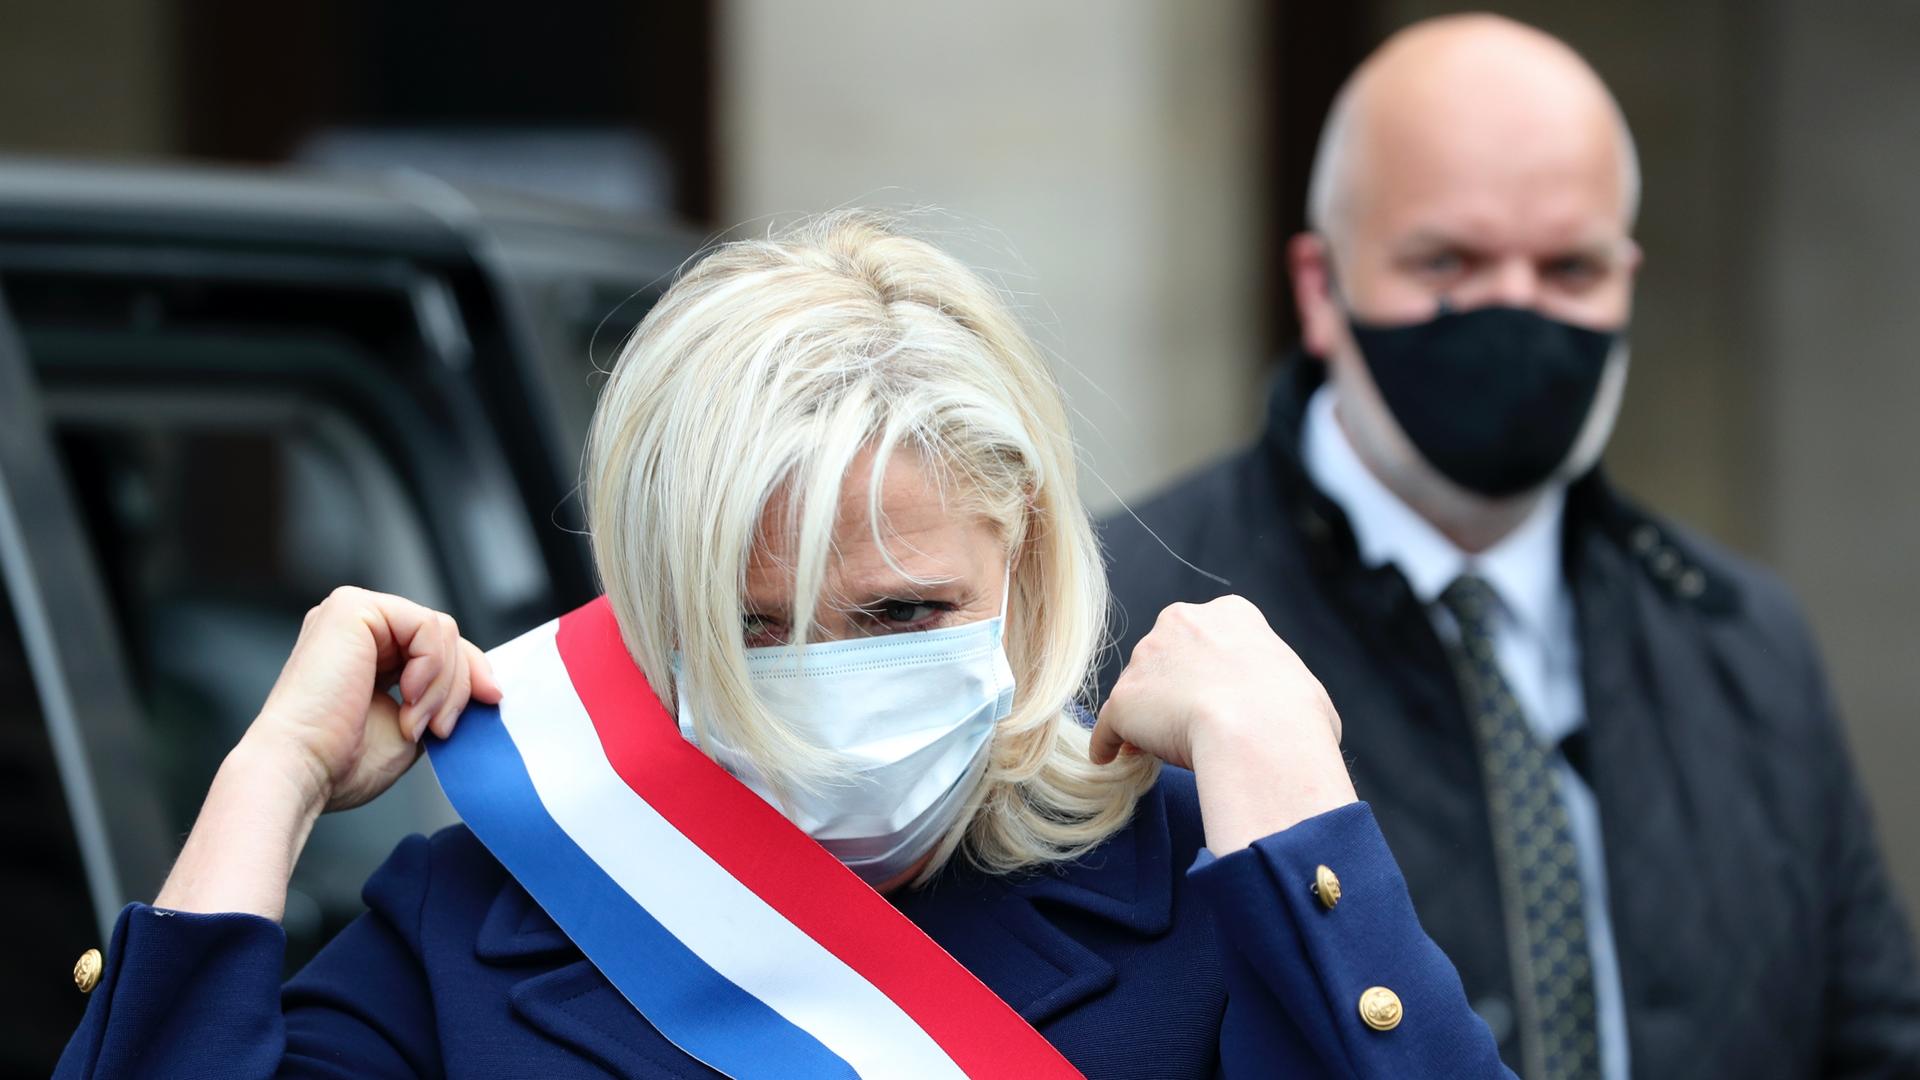 A white woman wearing a face mask also wears a red, white and blue sash around her chest and a man with a black mask stands behind her.